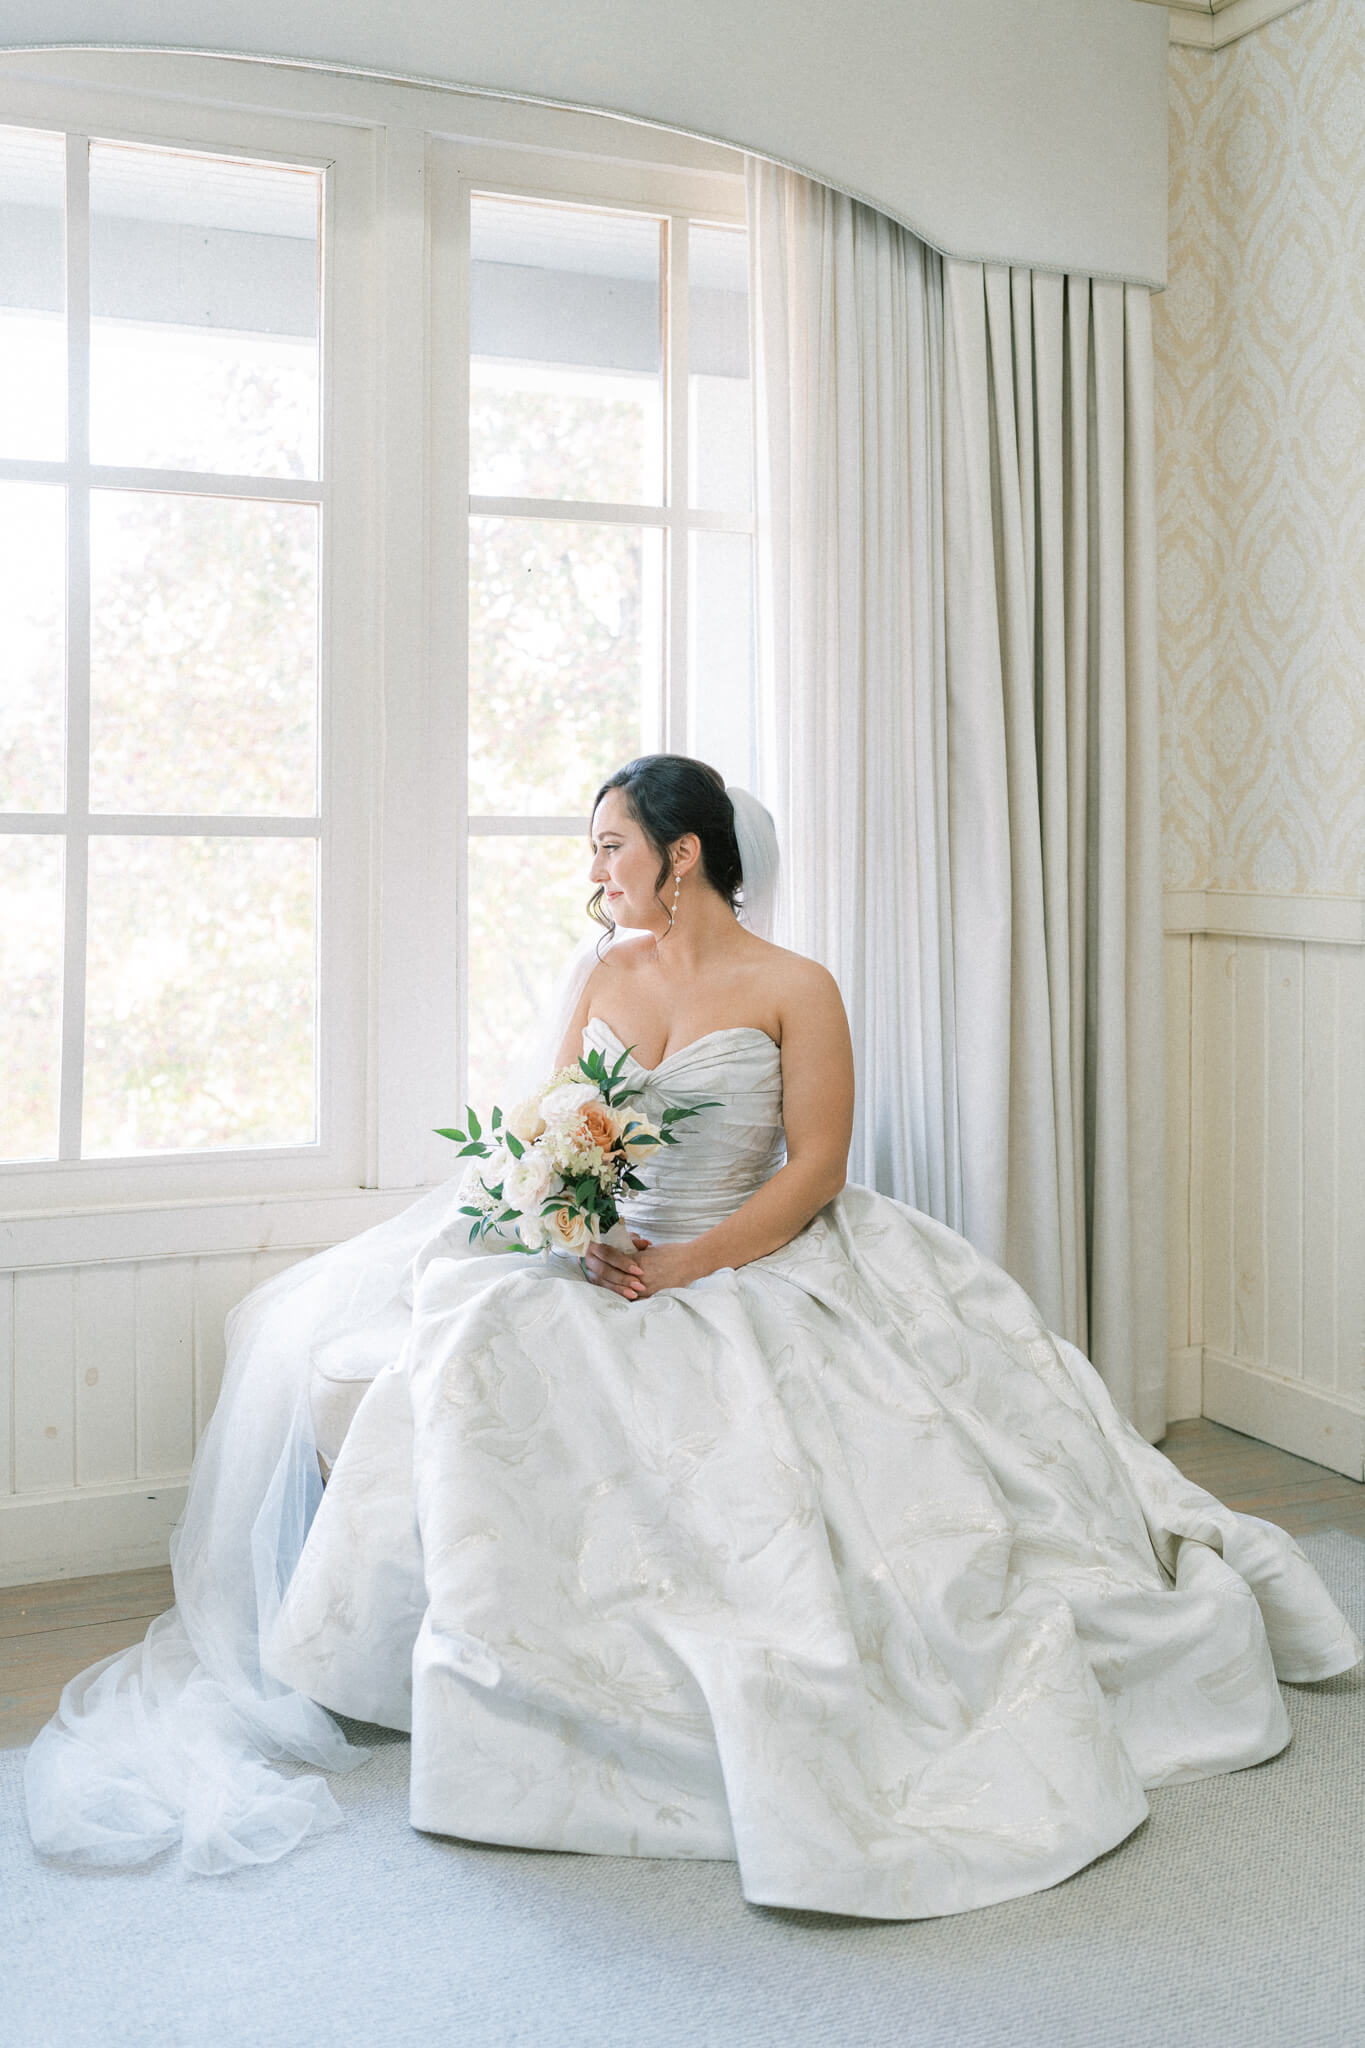 A bride in her wedding gown sitting on a chair in front of a window looking out.